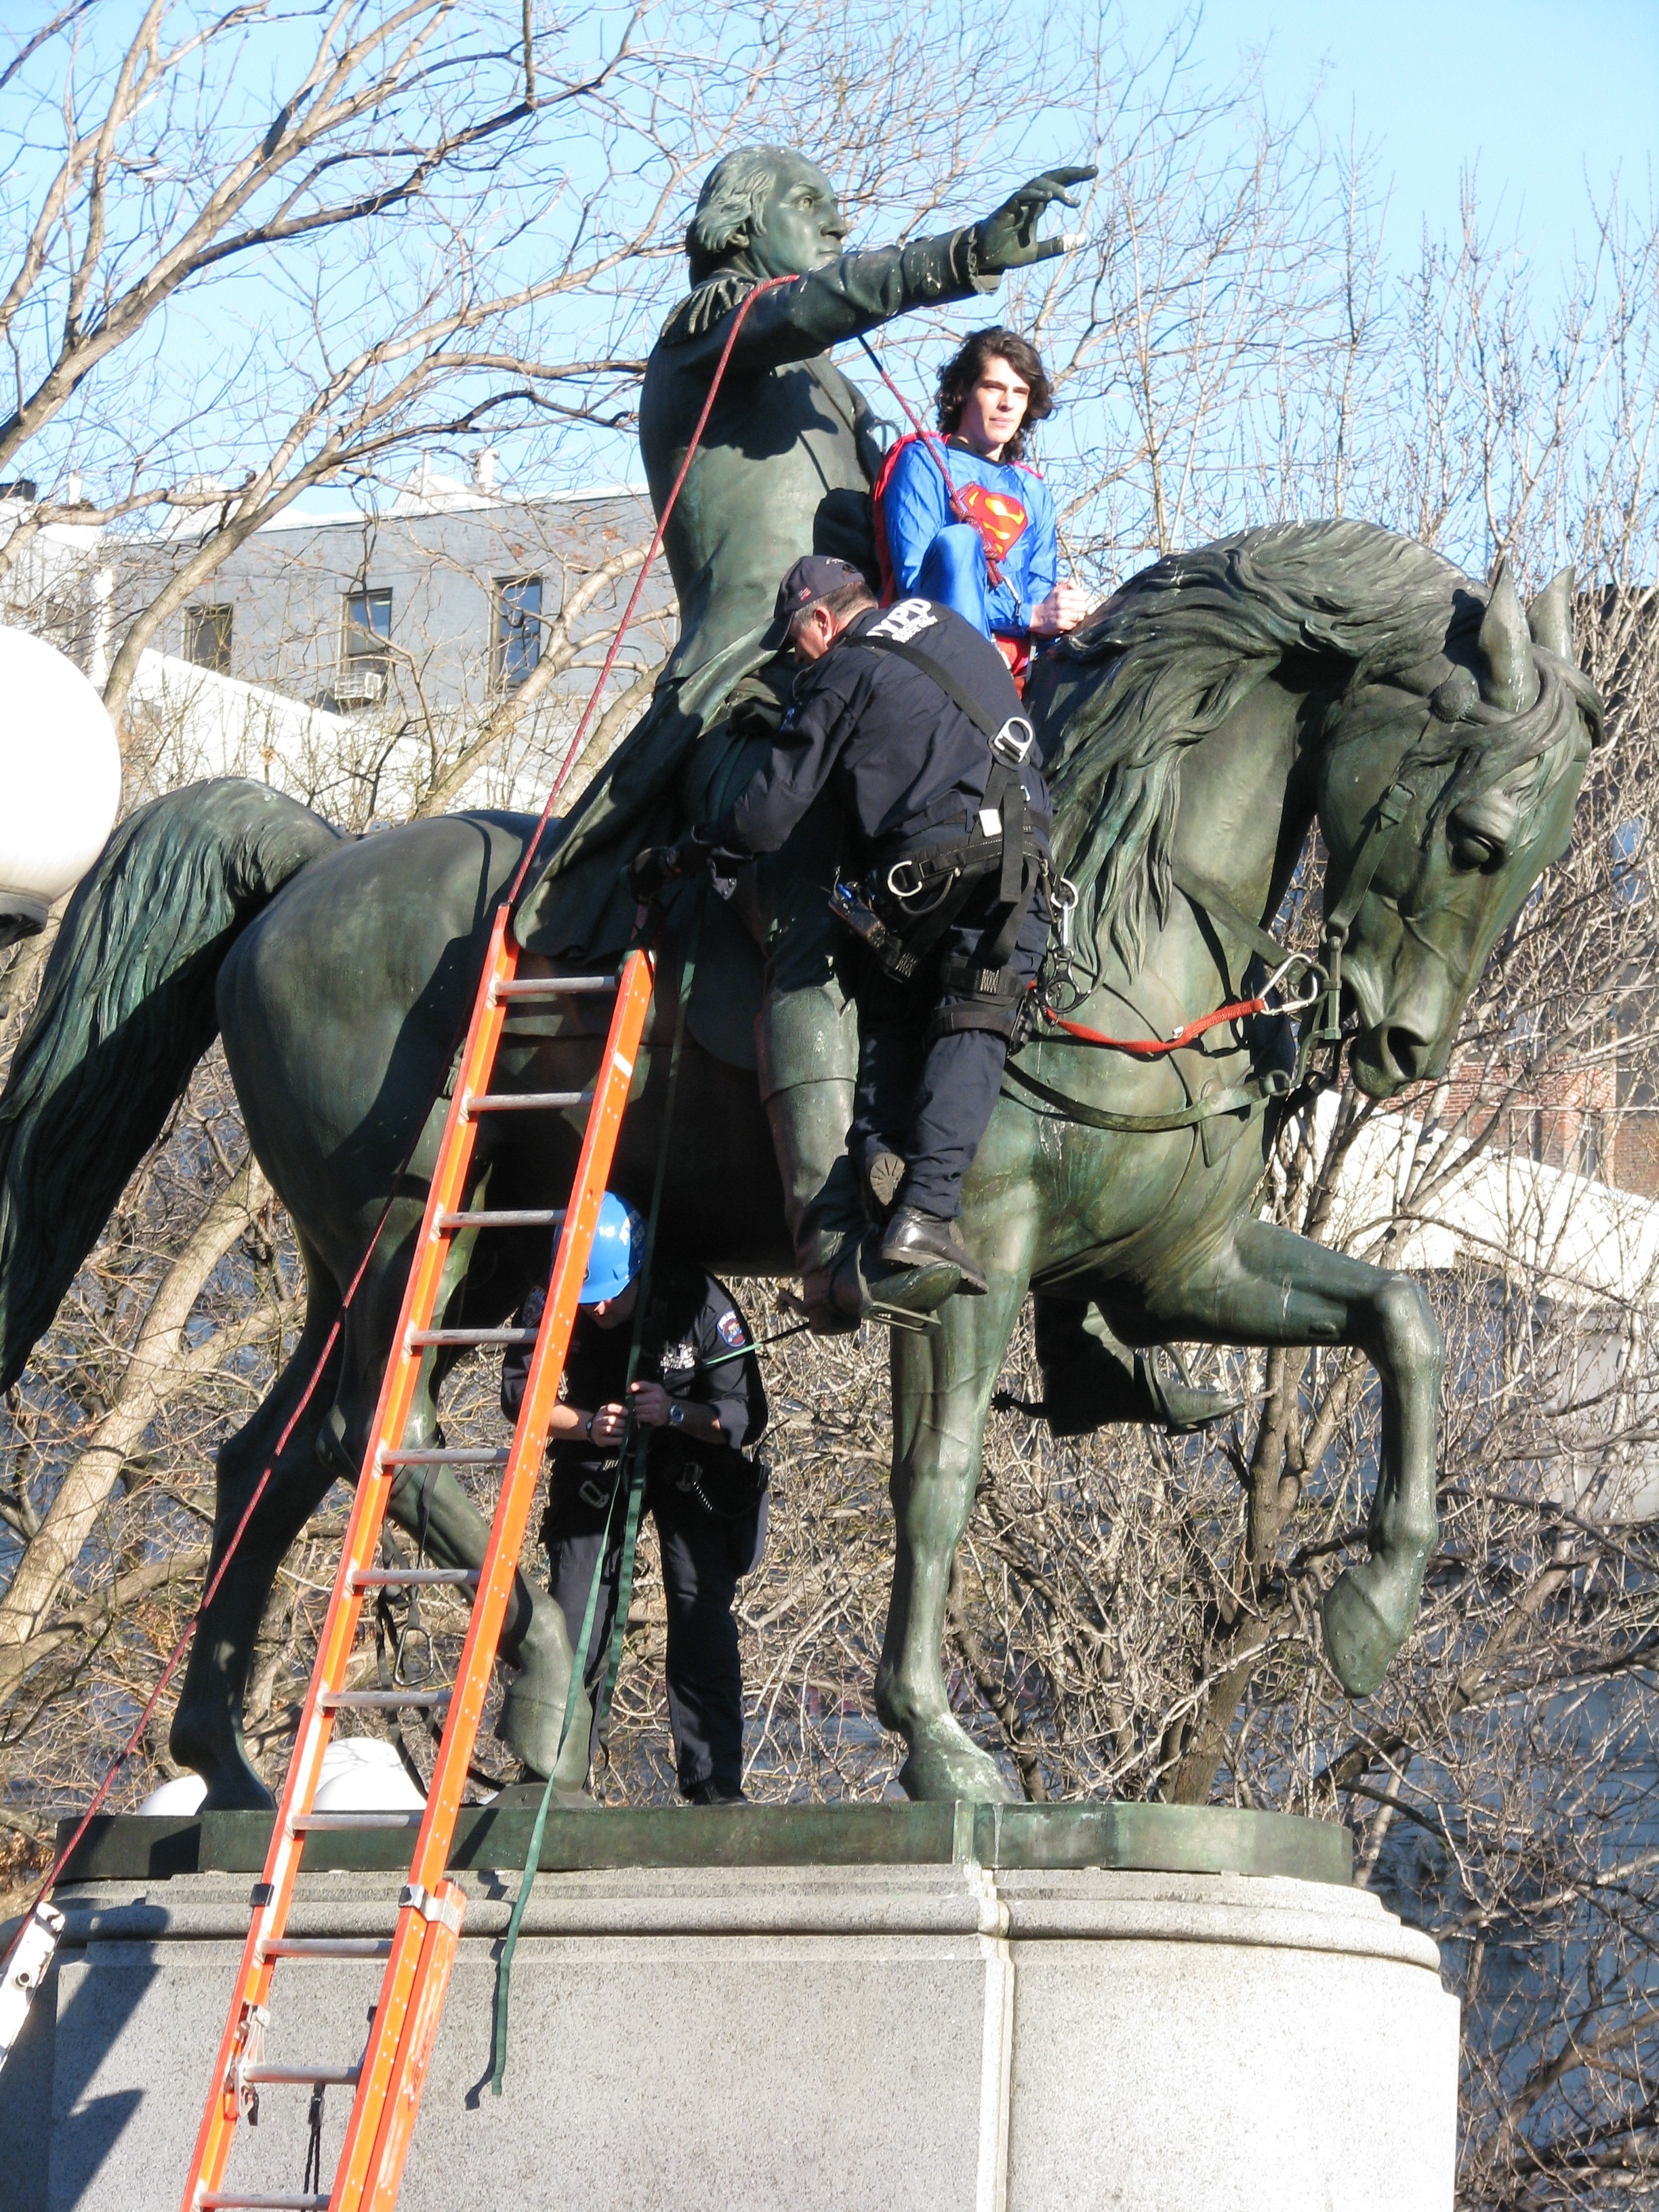 Maksim Katsnelson dressed as Superman atop Washington statue with NYPD trying to take him down